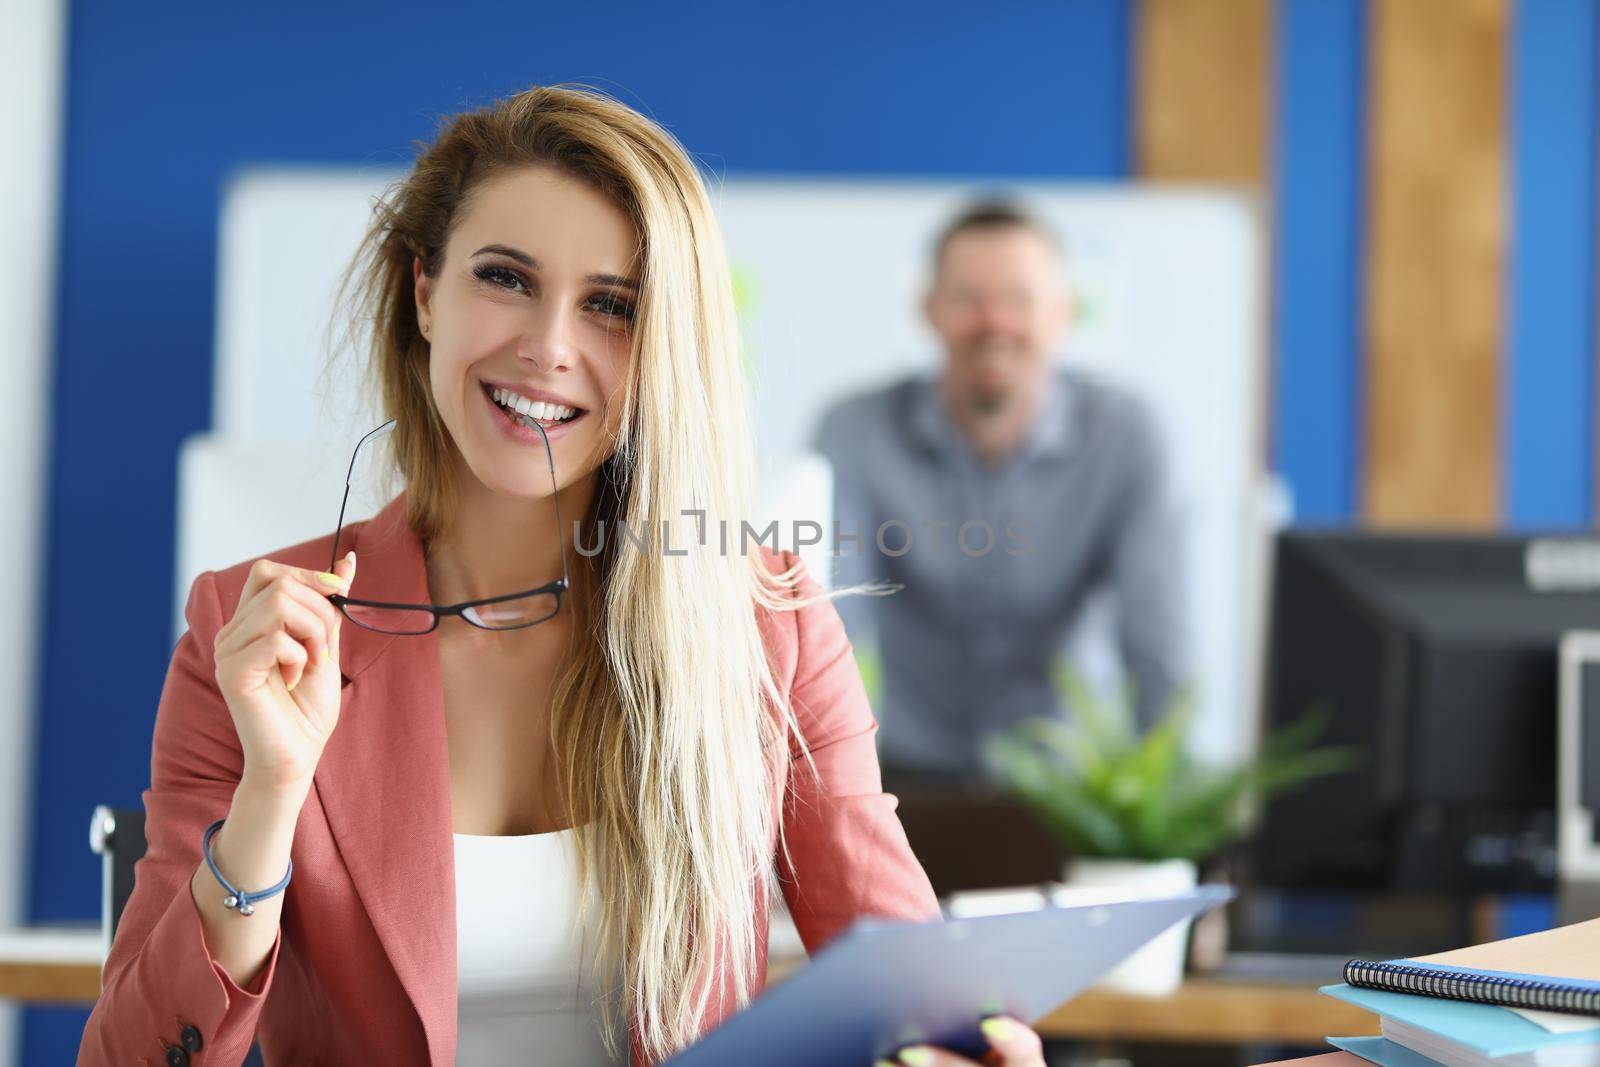 Portrait of cheerful optimistic female with clipboard, company dress code, office worker in suit. Perform daily tasks on workplace, woman employee, colleague on background. Business, career concept